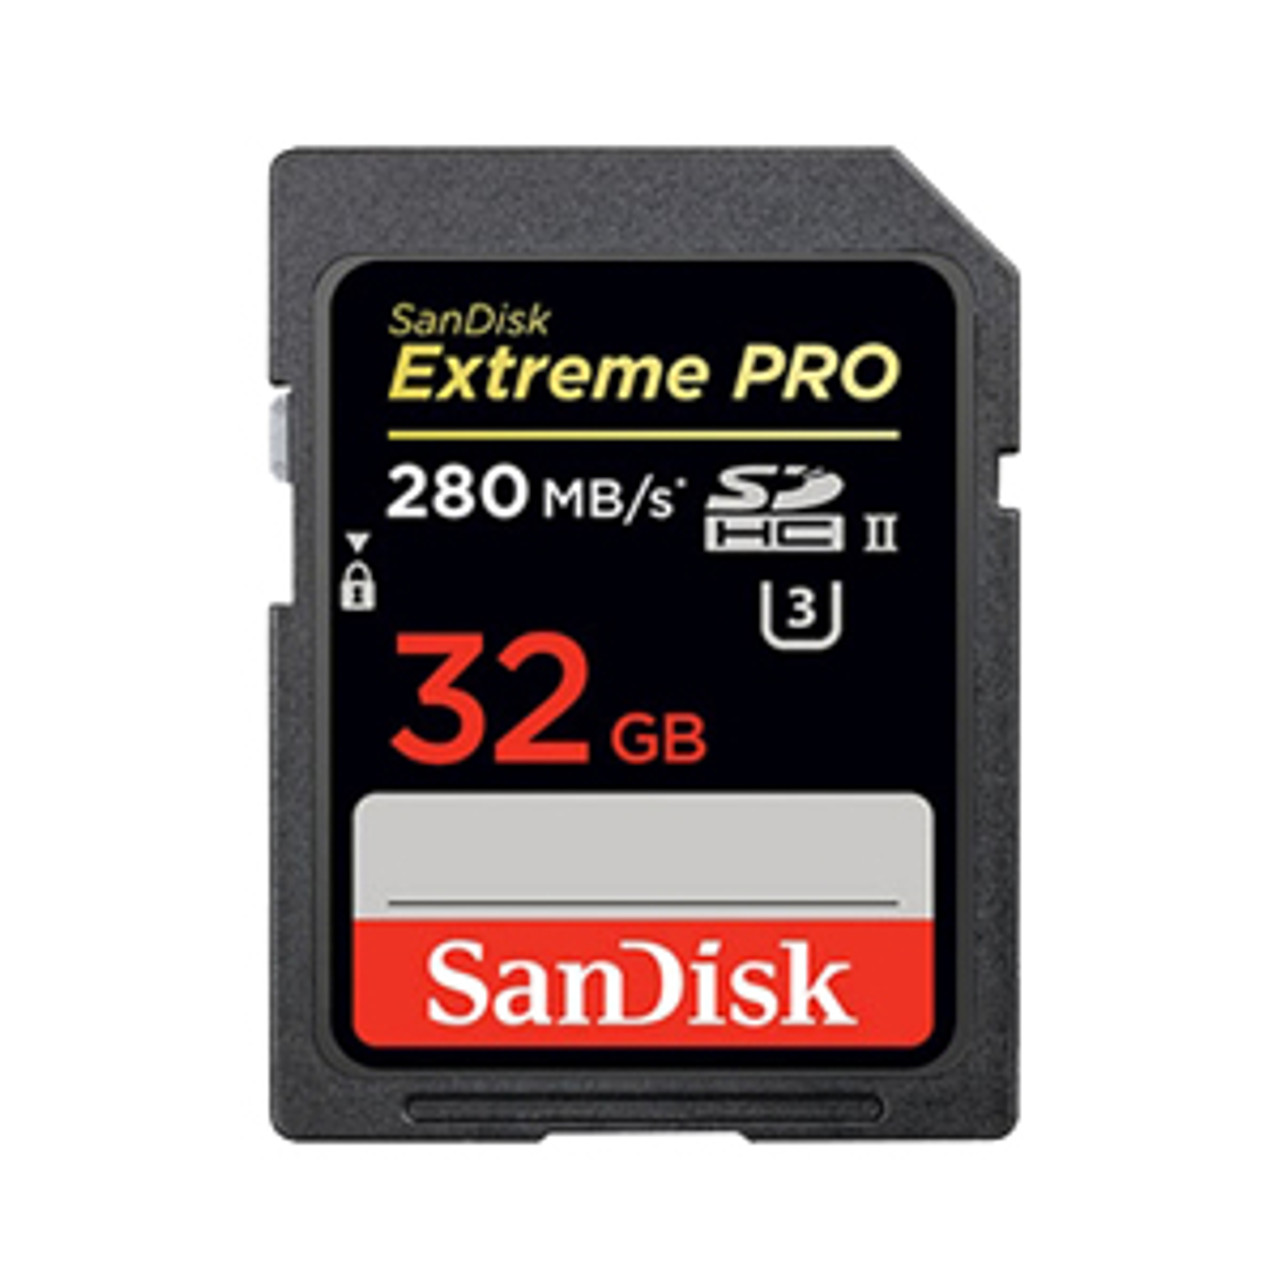 Sandisk Extreme Pro 32GB 1867X 280MB/s UHS-II SDHC Card